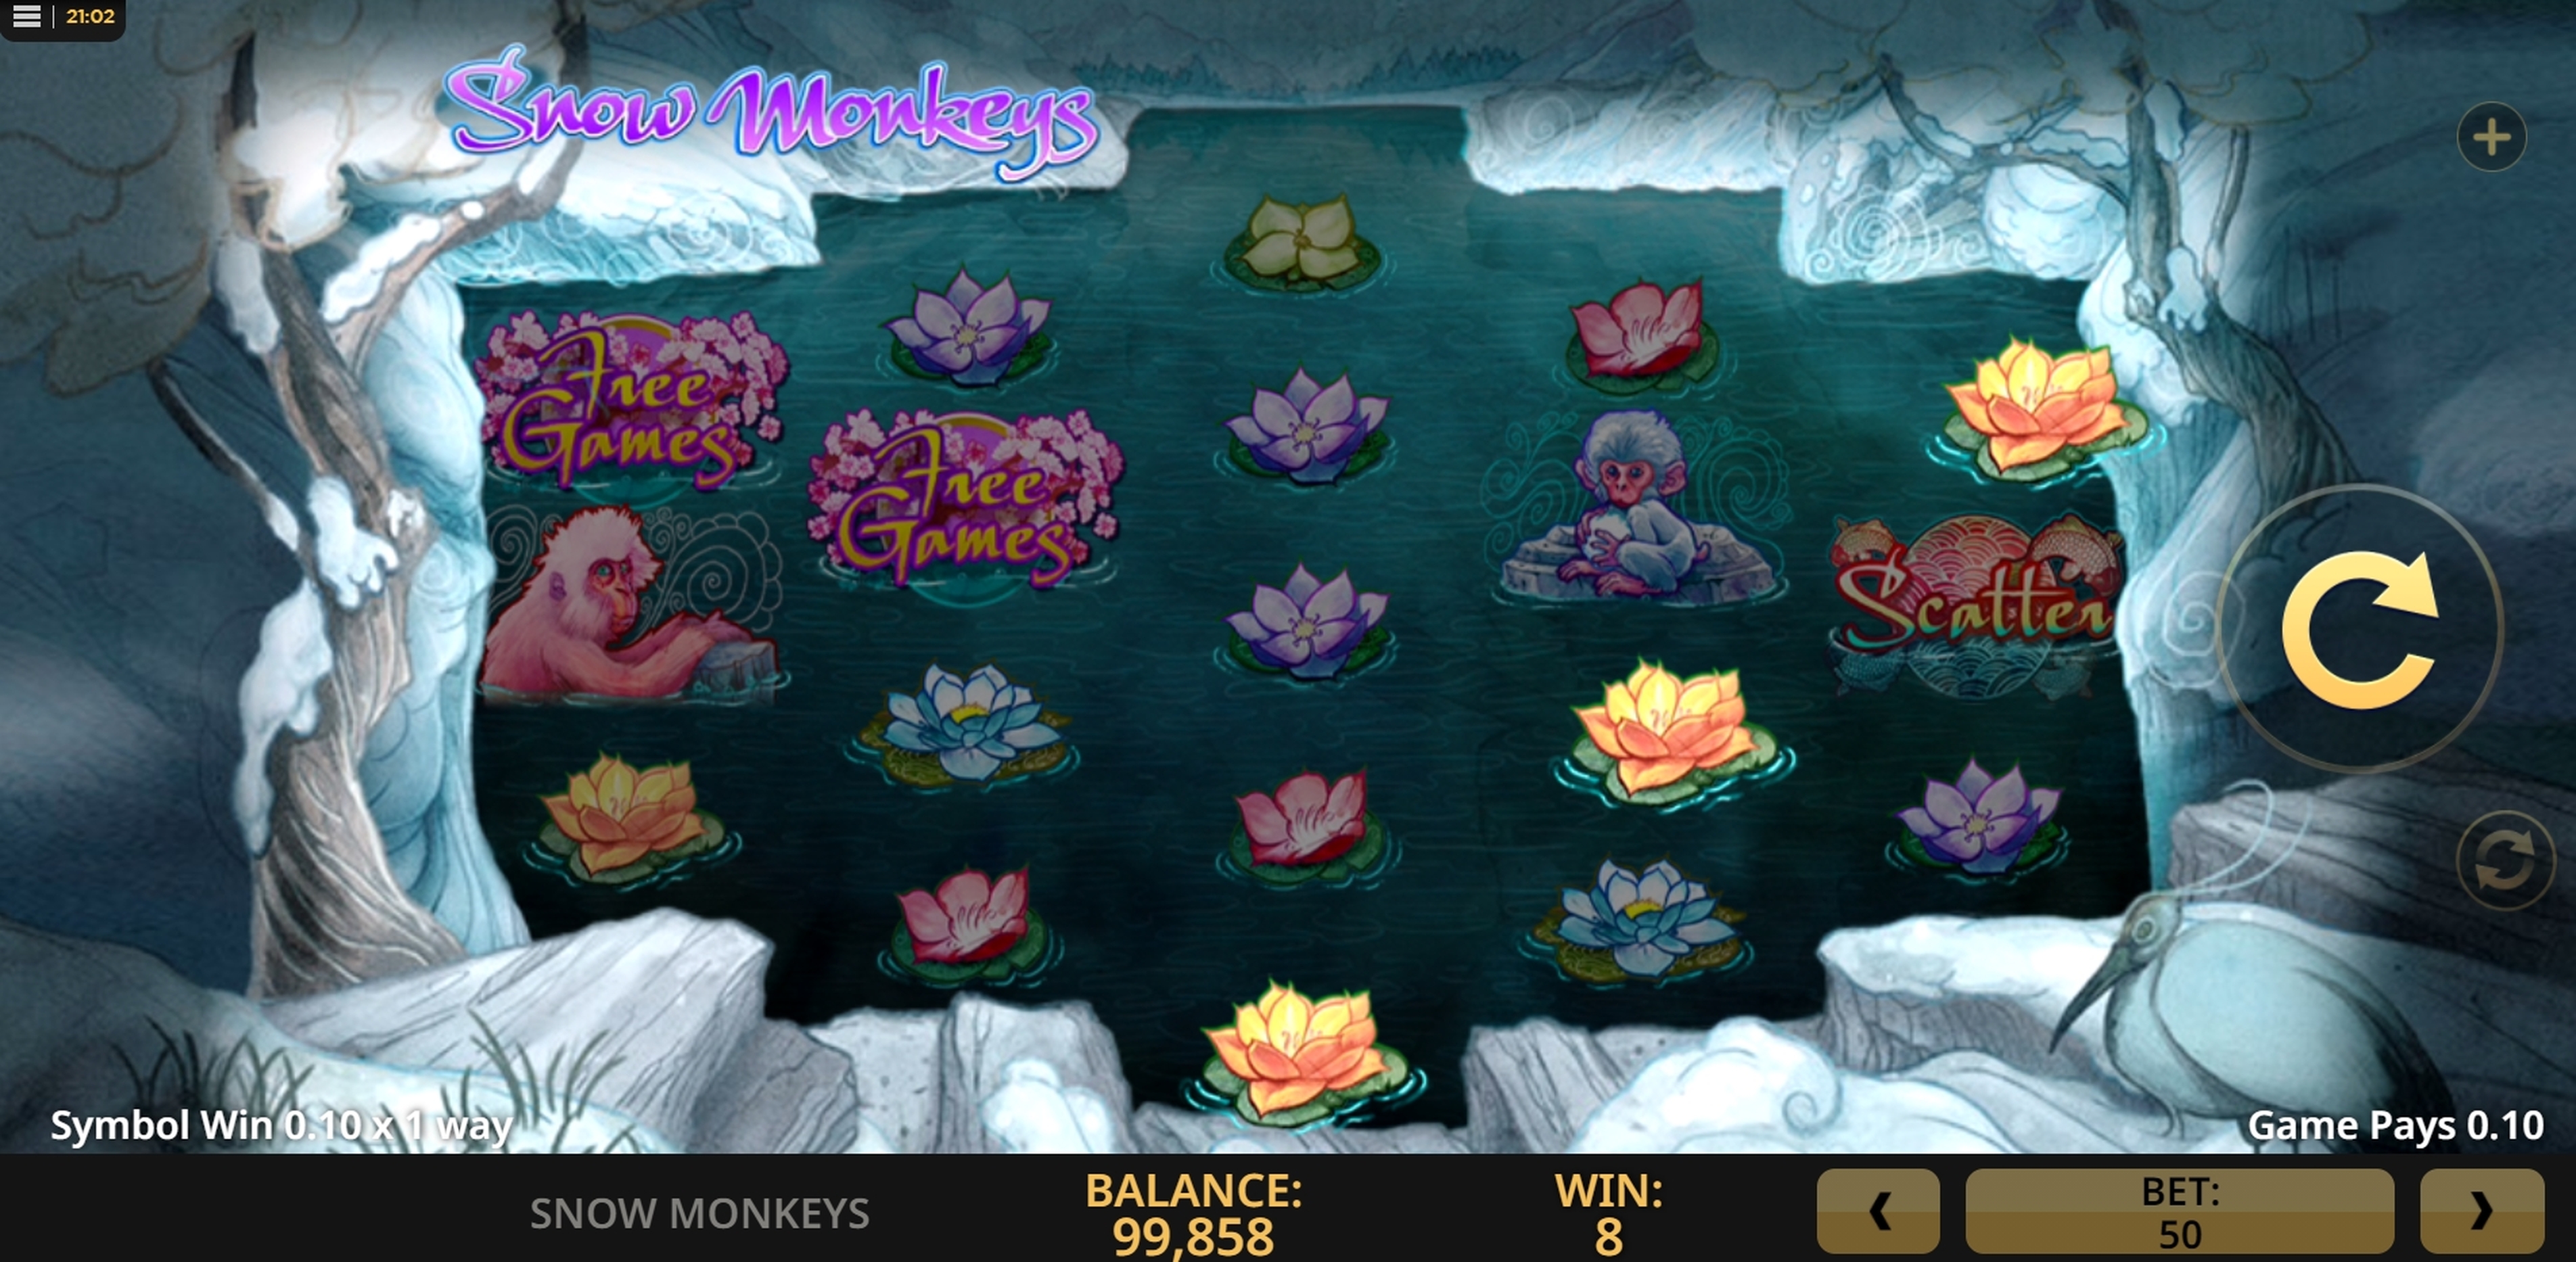 Win Money in Snow Monkeys Free Slot Game by High 5 Games